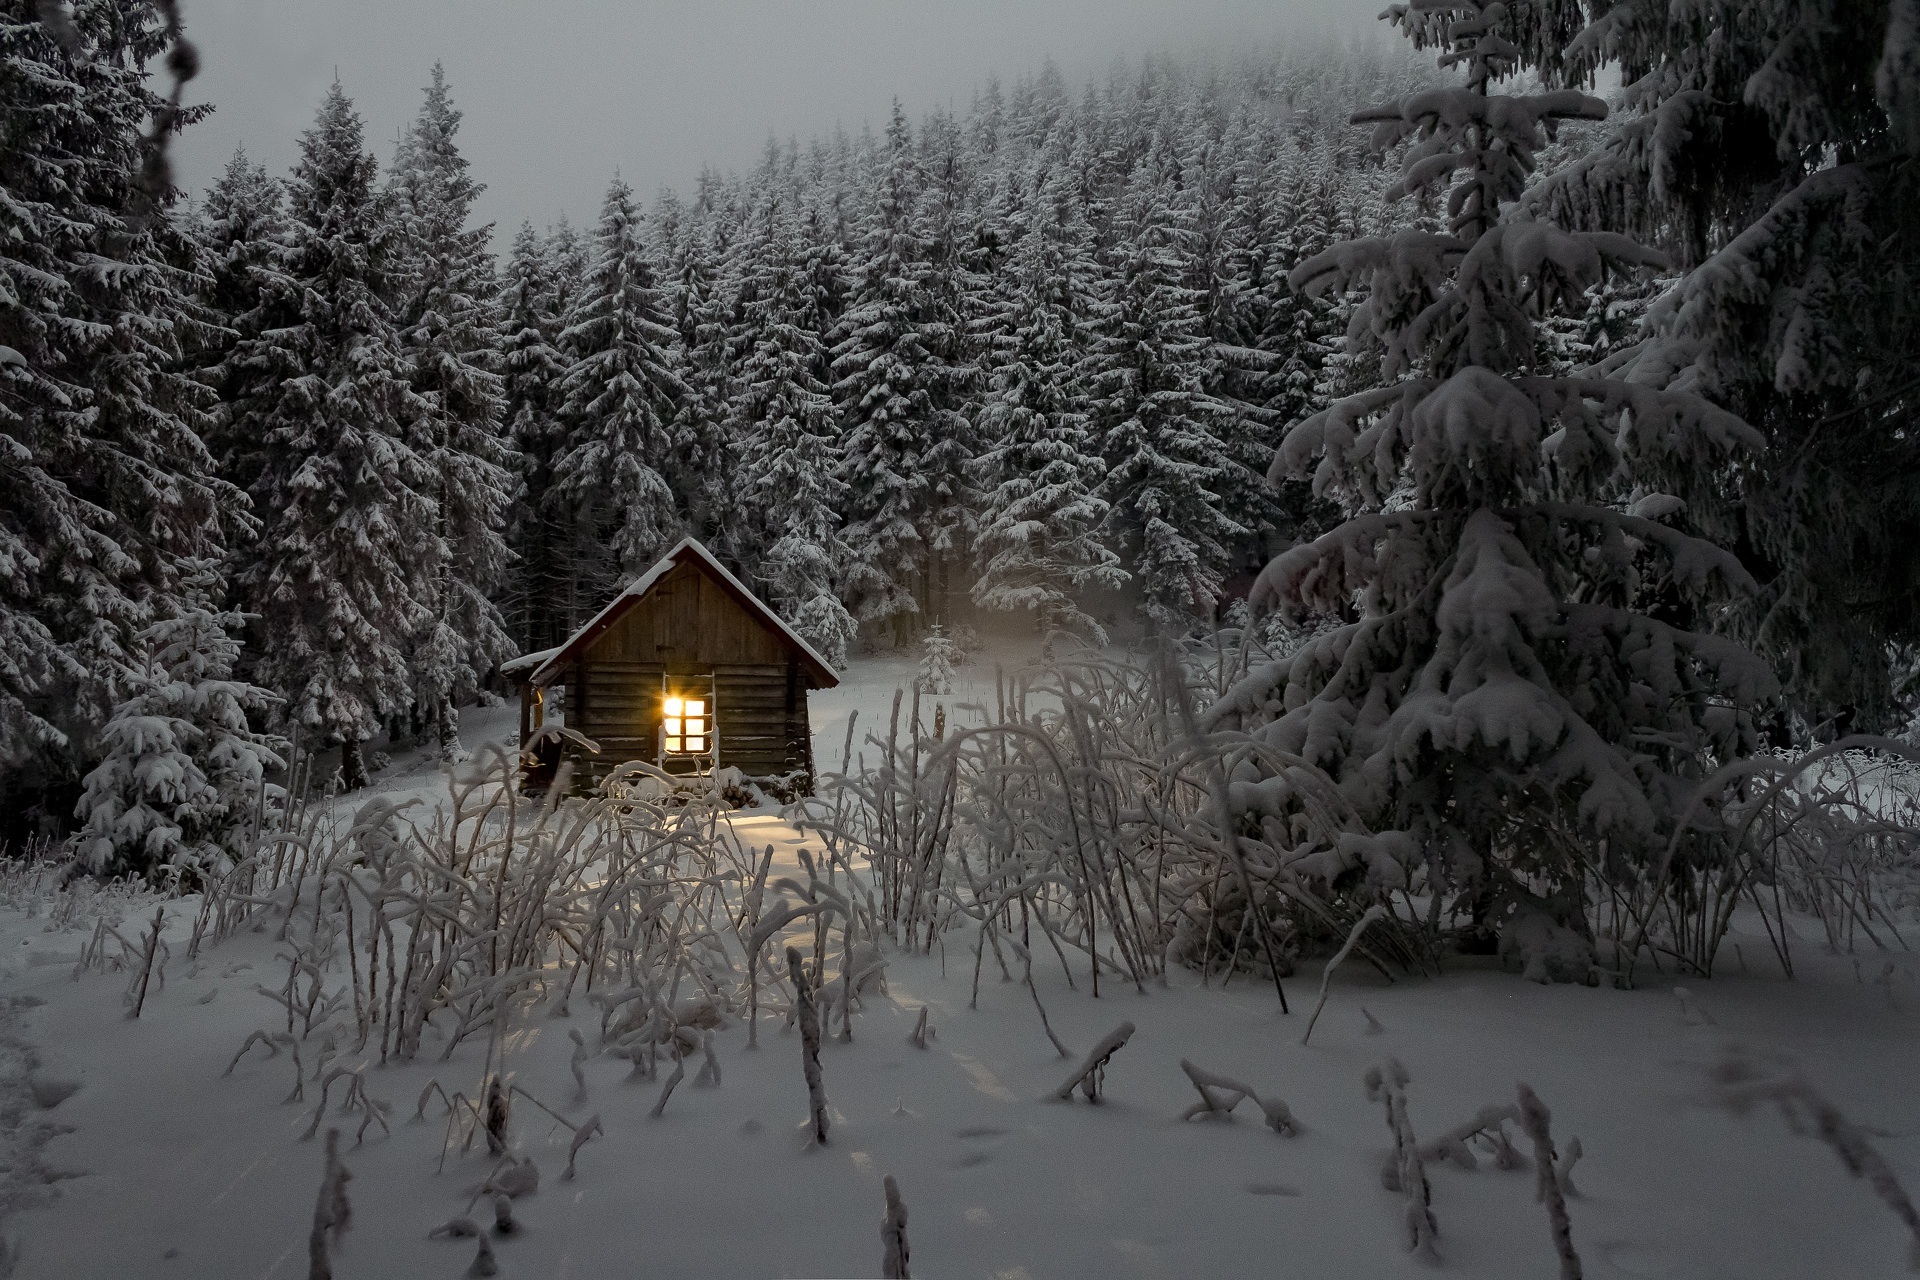 A lonely house in a winter forest surrounded by snow-covered fir trees